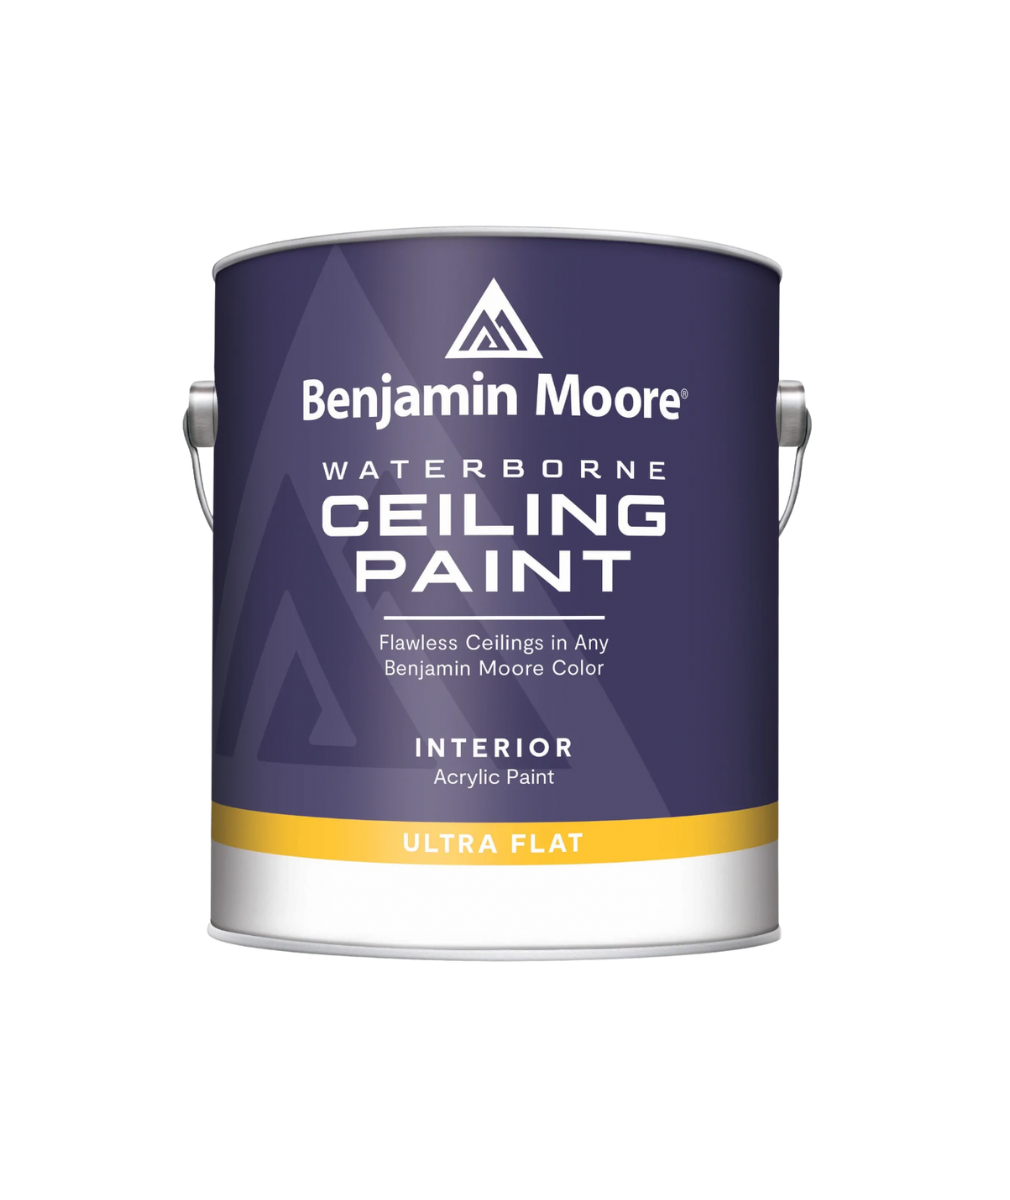 Benjamin Moore Waterborne Ceiling Paint , available at Johnson Paint & Maine Paint in MA, NH & ME.